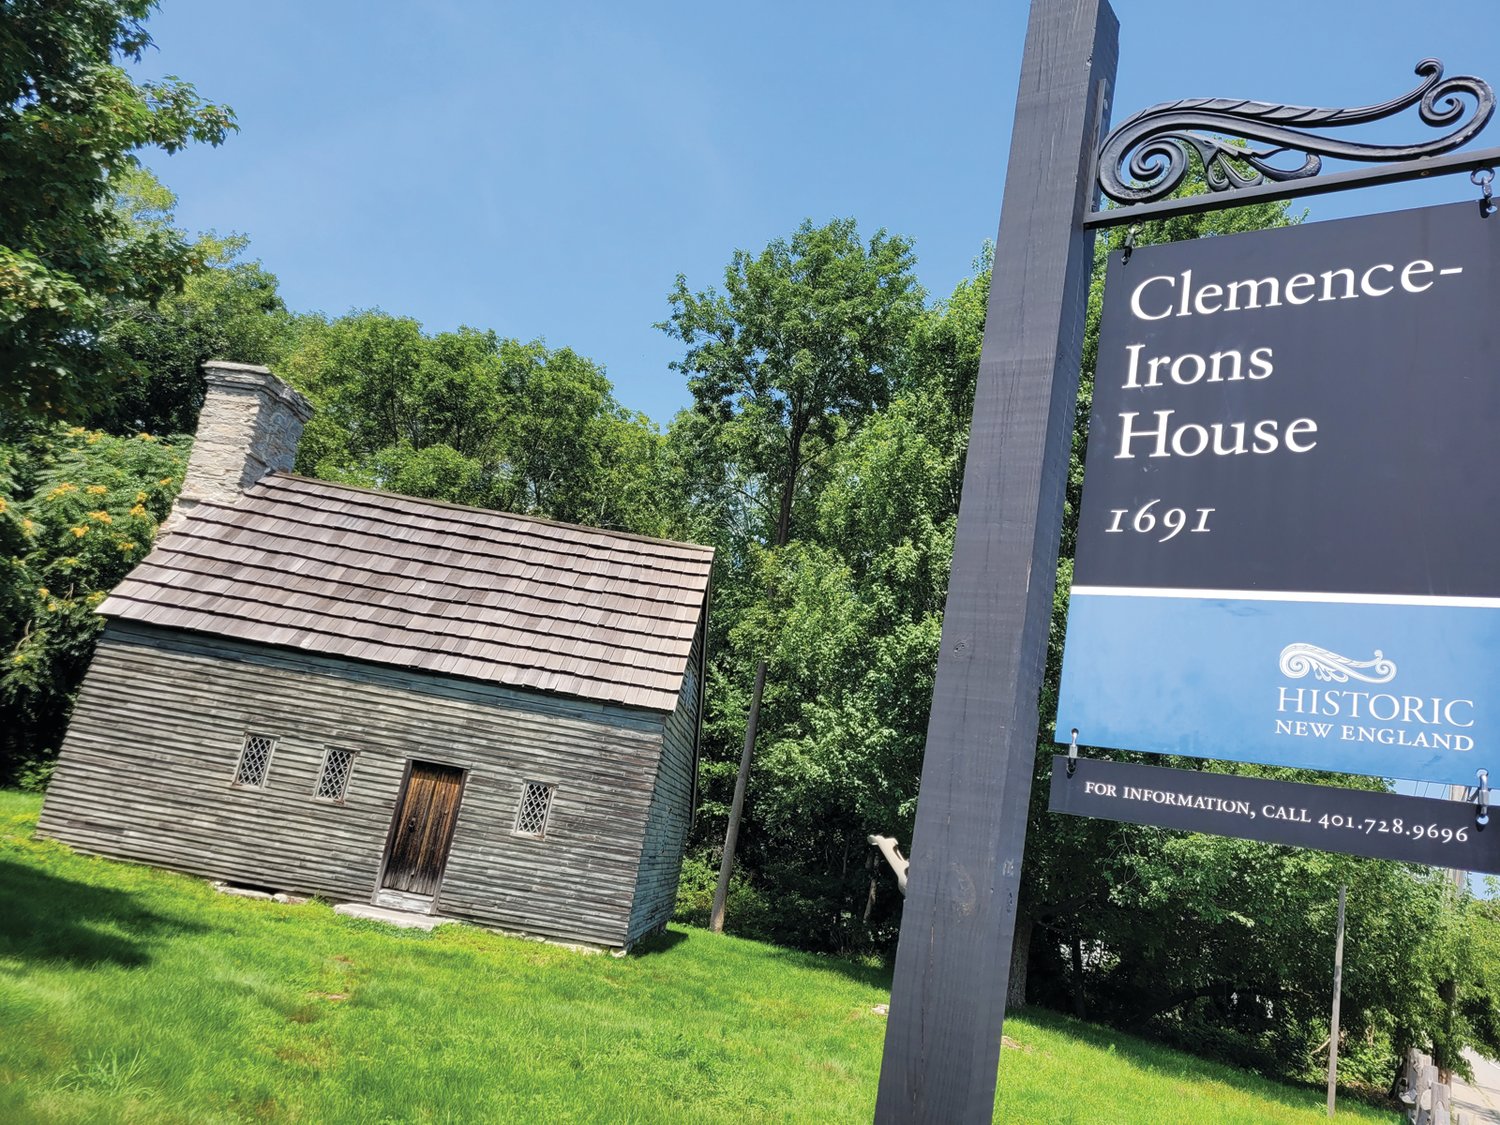 330 YEARS: The Clemence-Irons House on George Waterman Road in Johnston is one of Rhode Island’s, and the nation’s, oldest surviving homes.